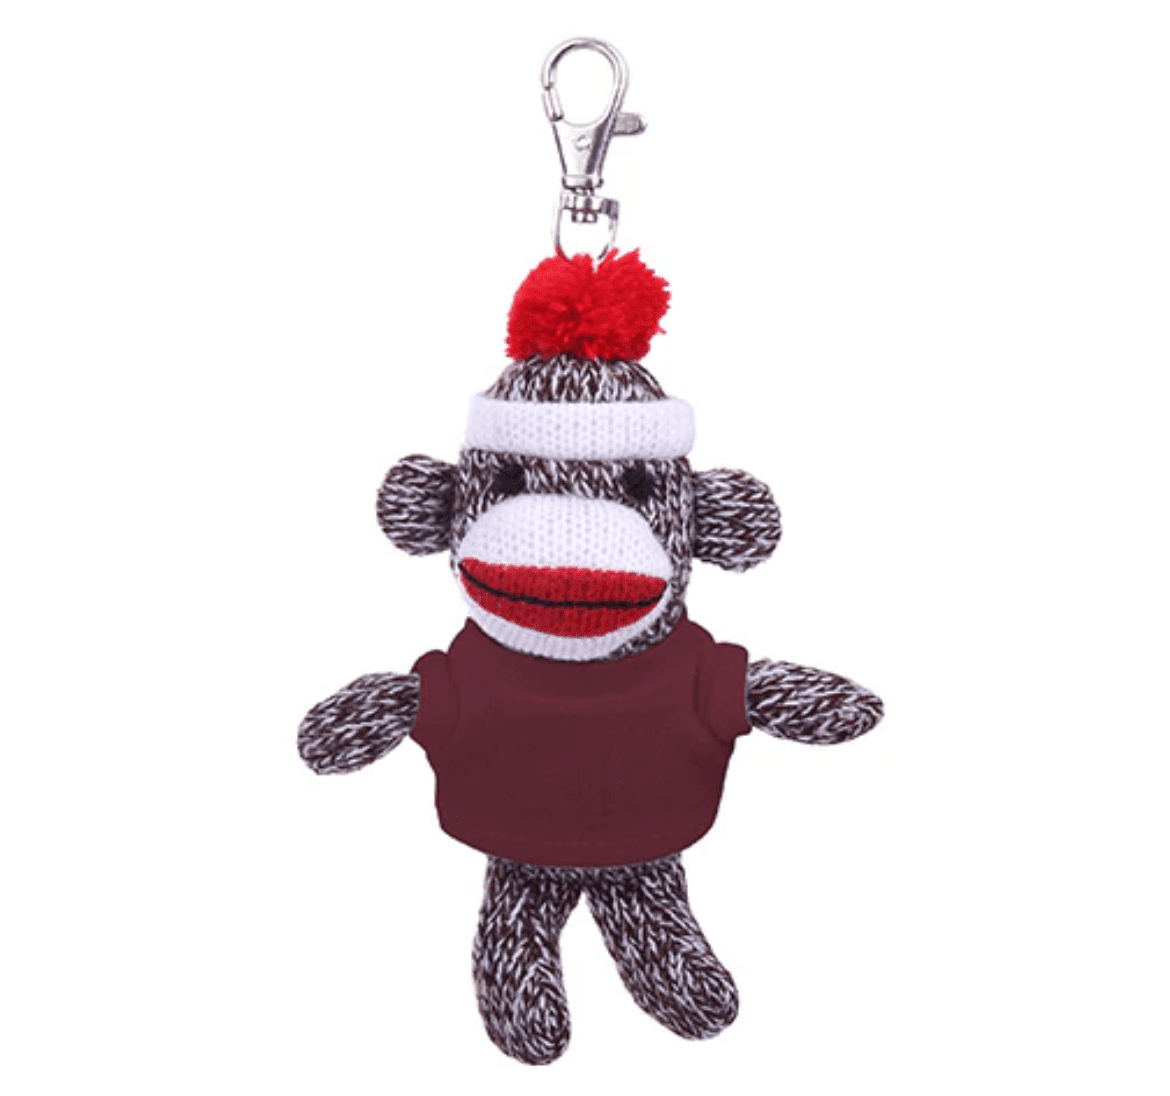 VERY HARD TO FIND MINT WITH MINT TAG Details about   TY BEANIE GREY SOCK MONKEY KEY CLIP 